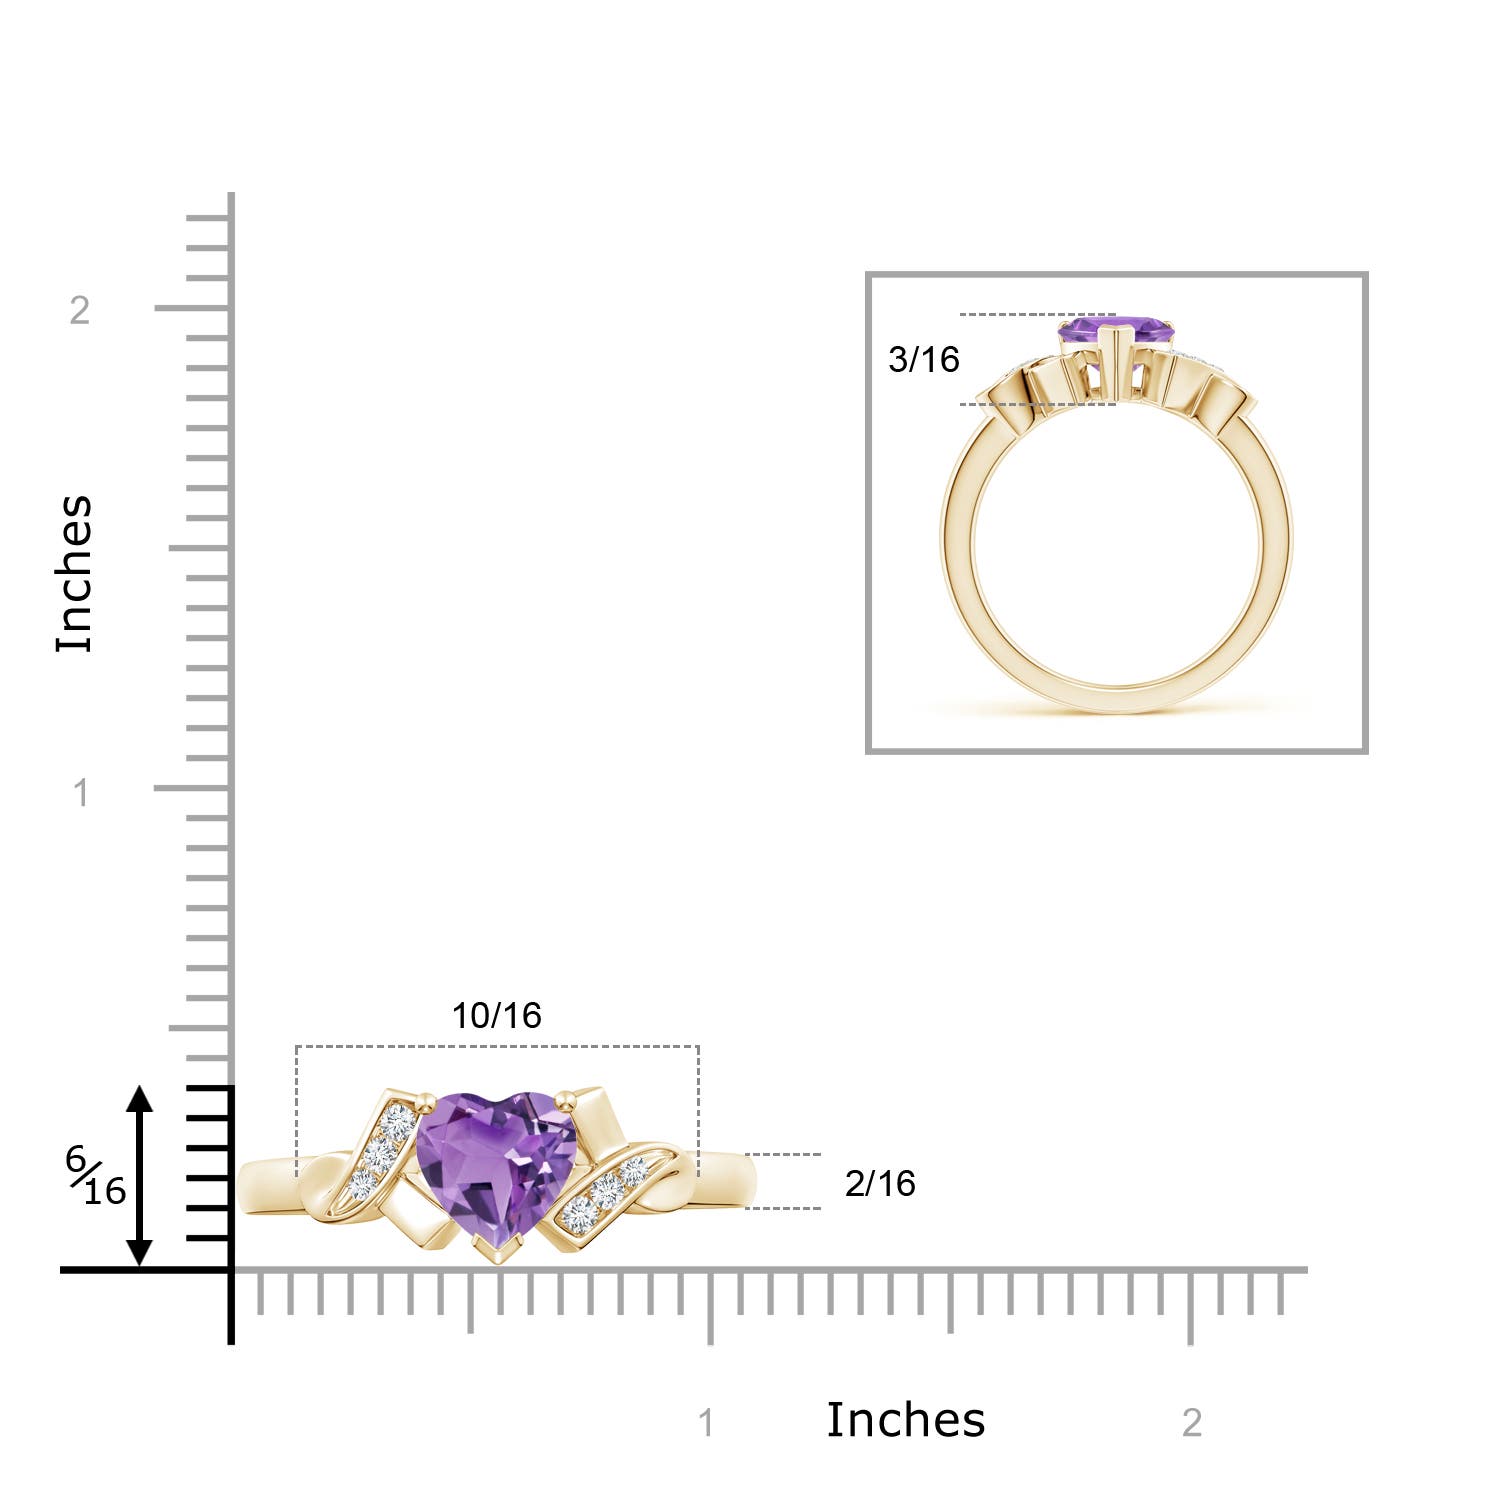 A - Amethyst / 1.17 CT / 14 KT Yellow Gold